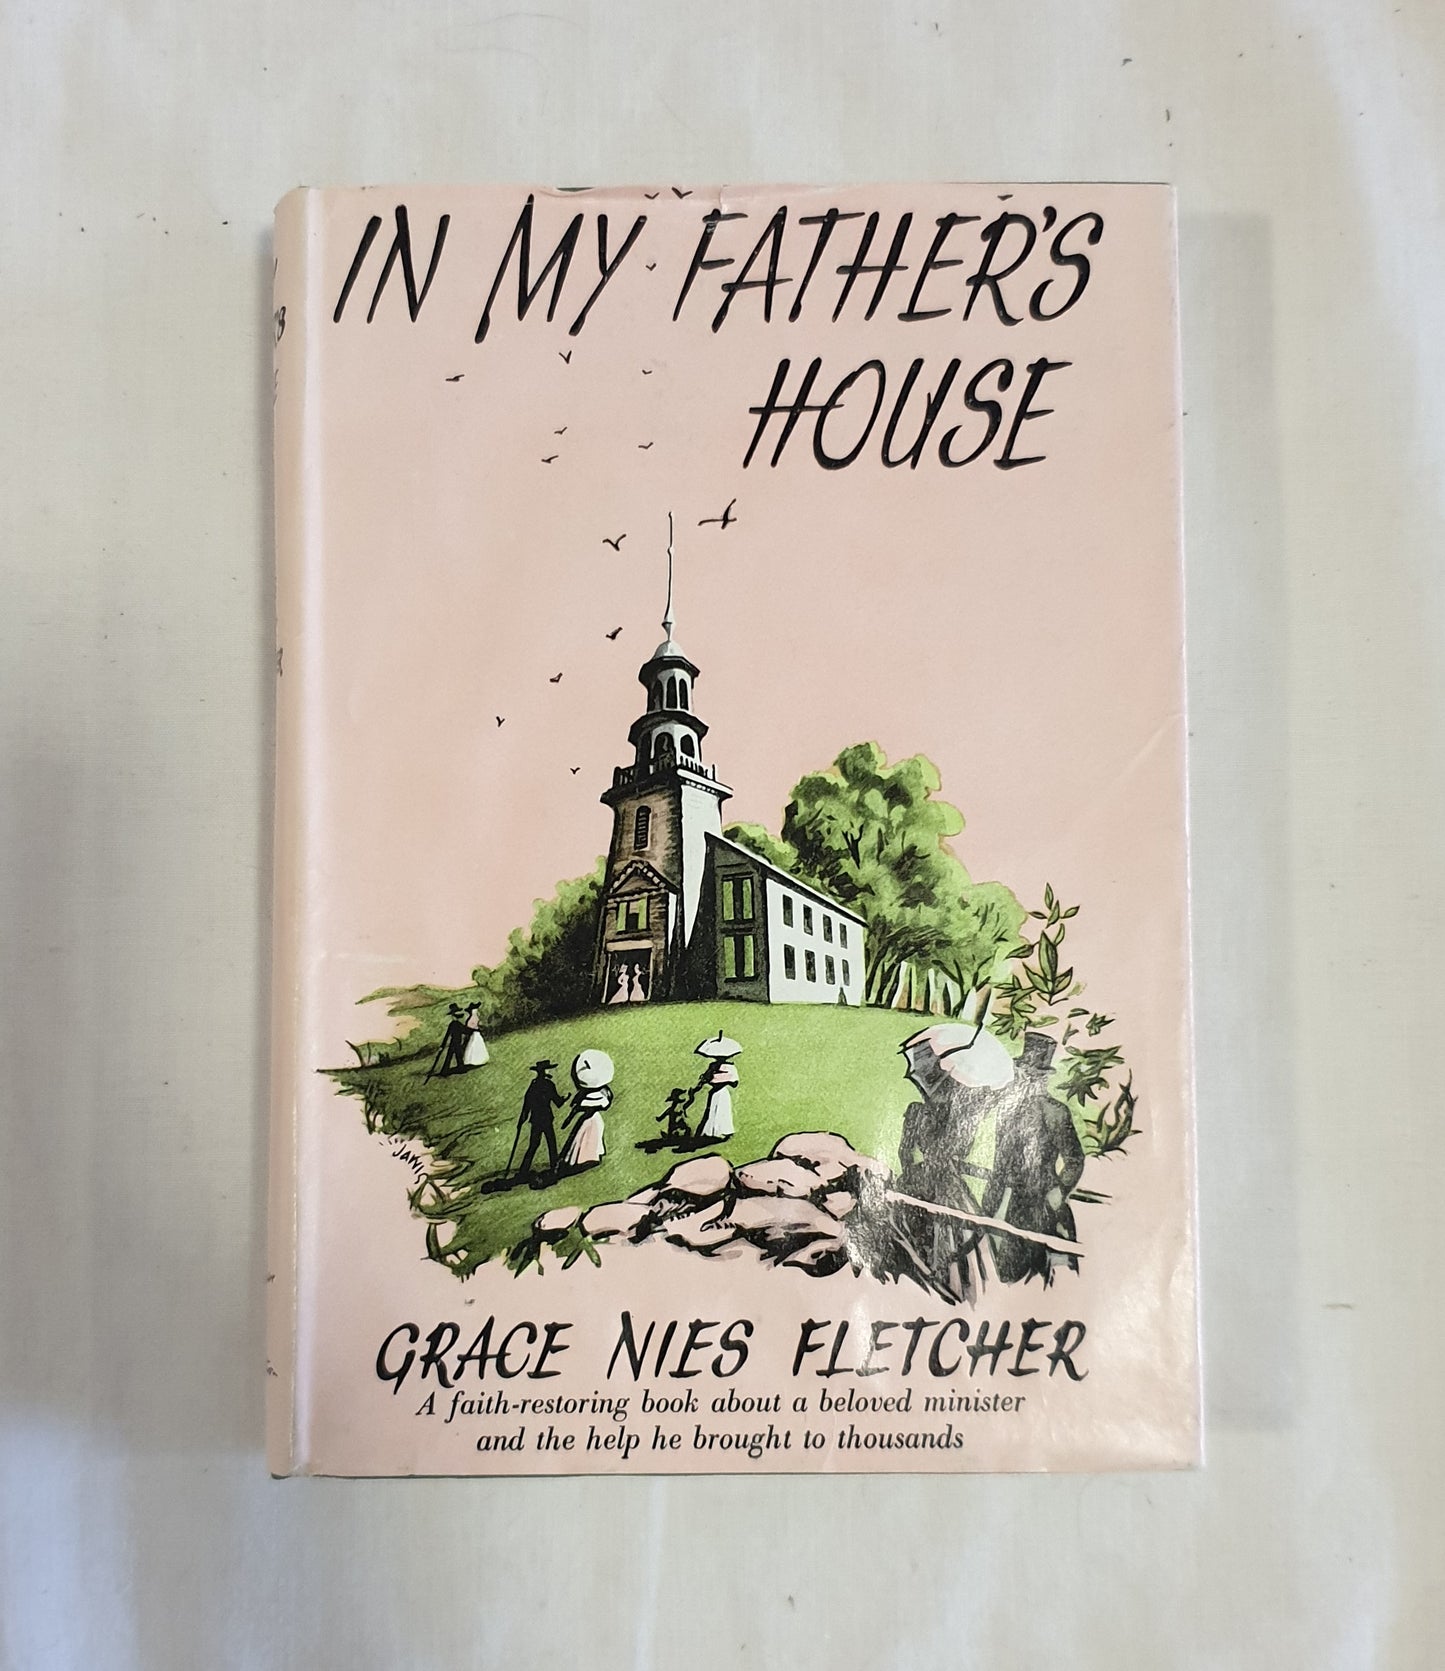 In My Father's House by Grace Nies Fletcher